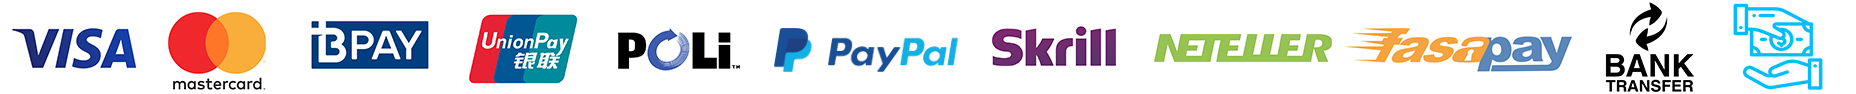 payment options logo